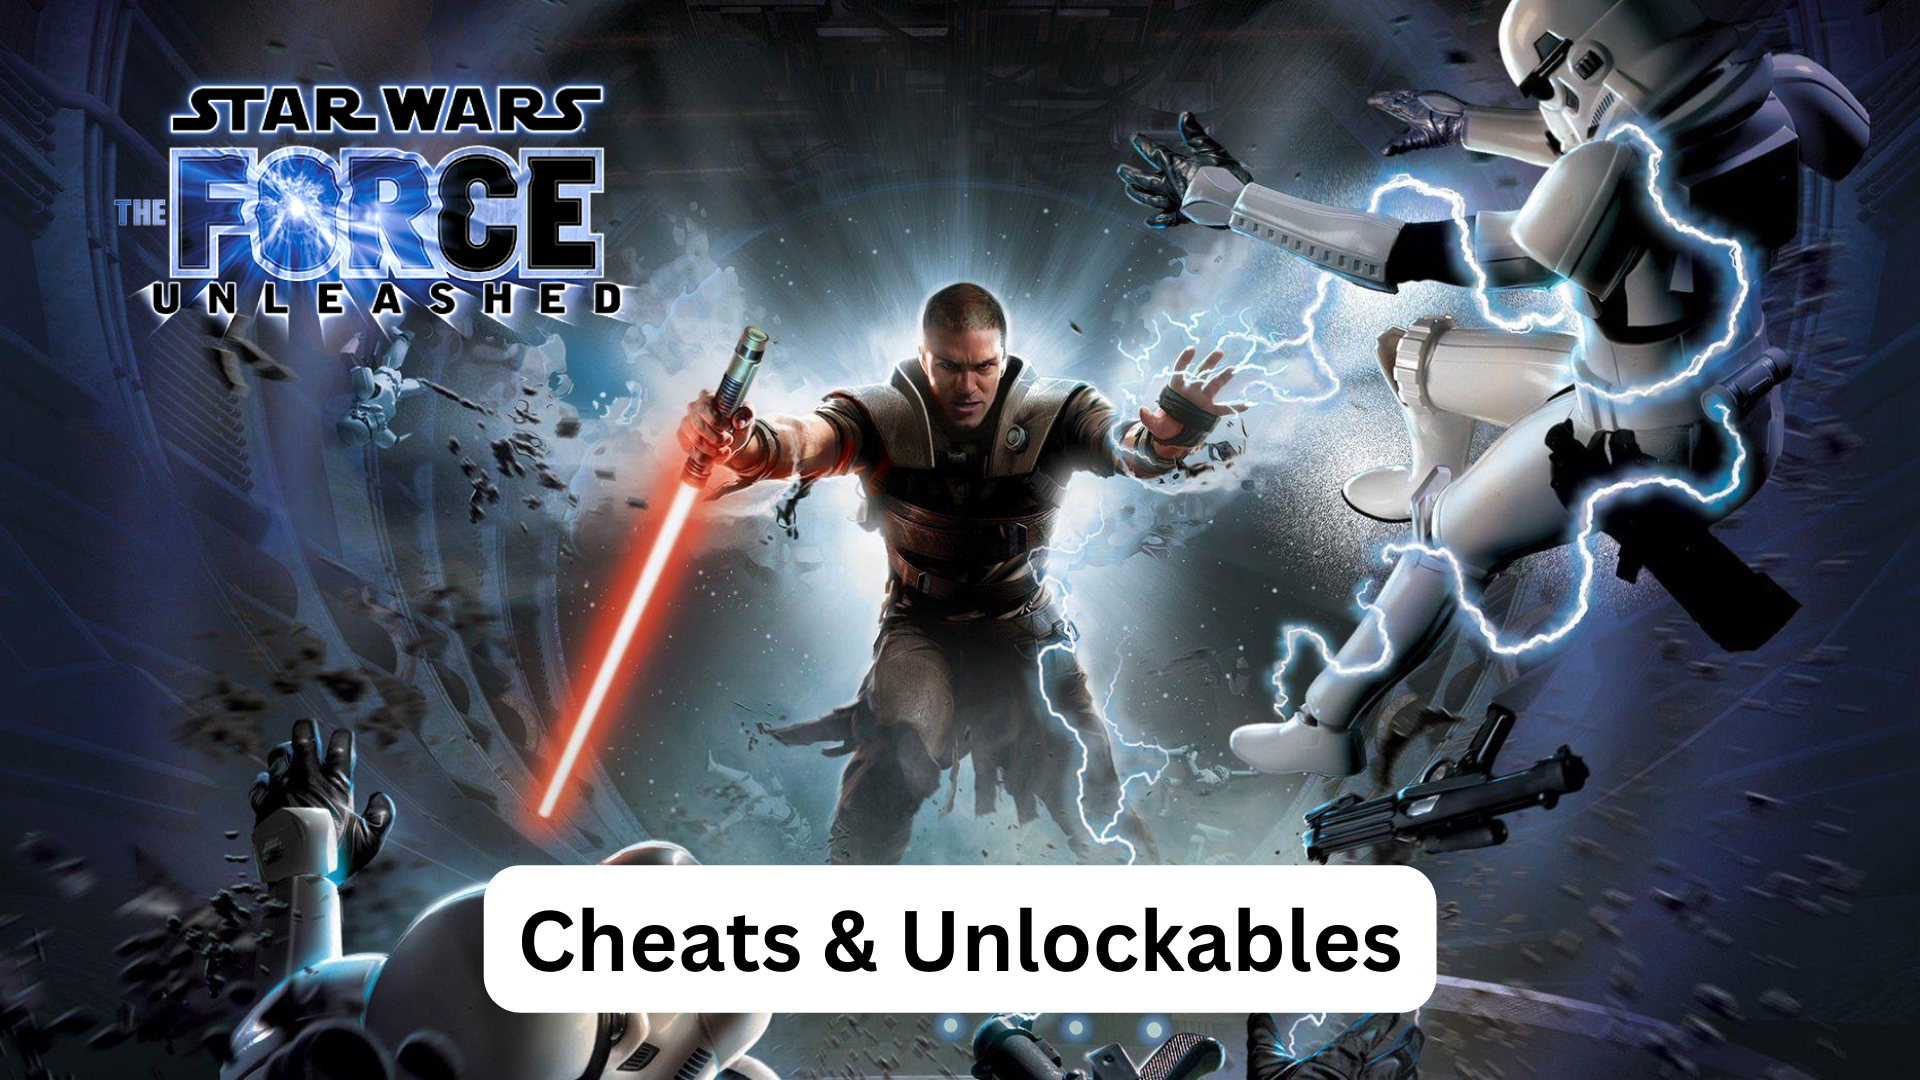 star wars: the force unleashed cheats and unlockables